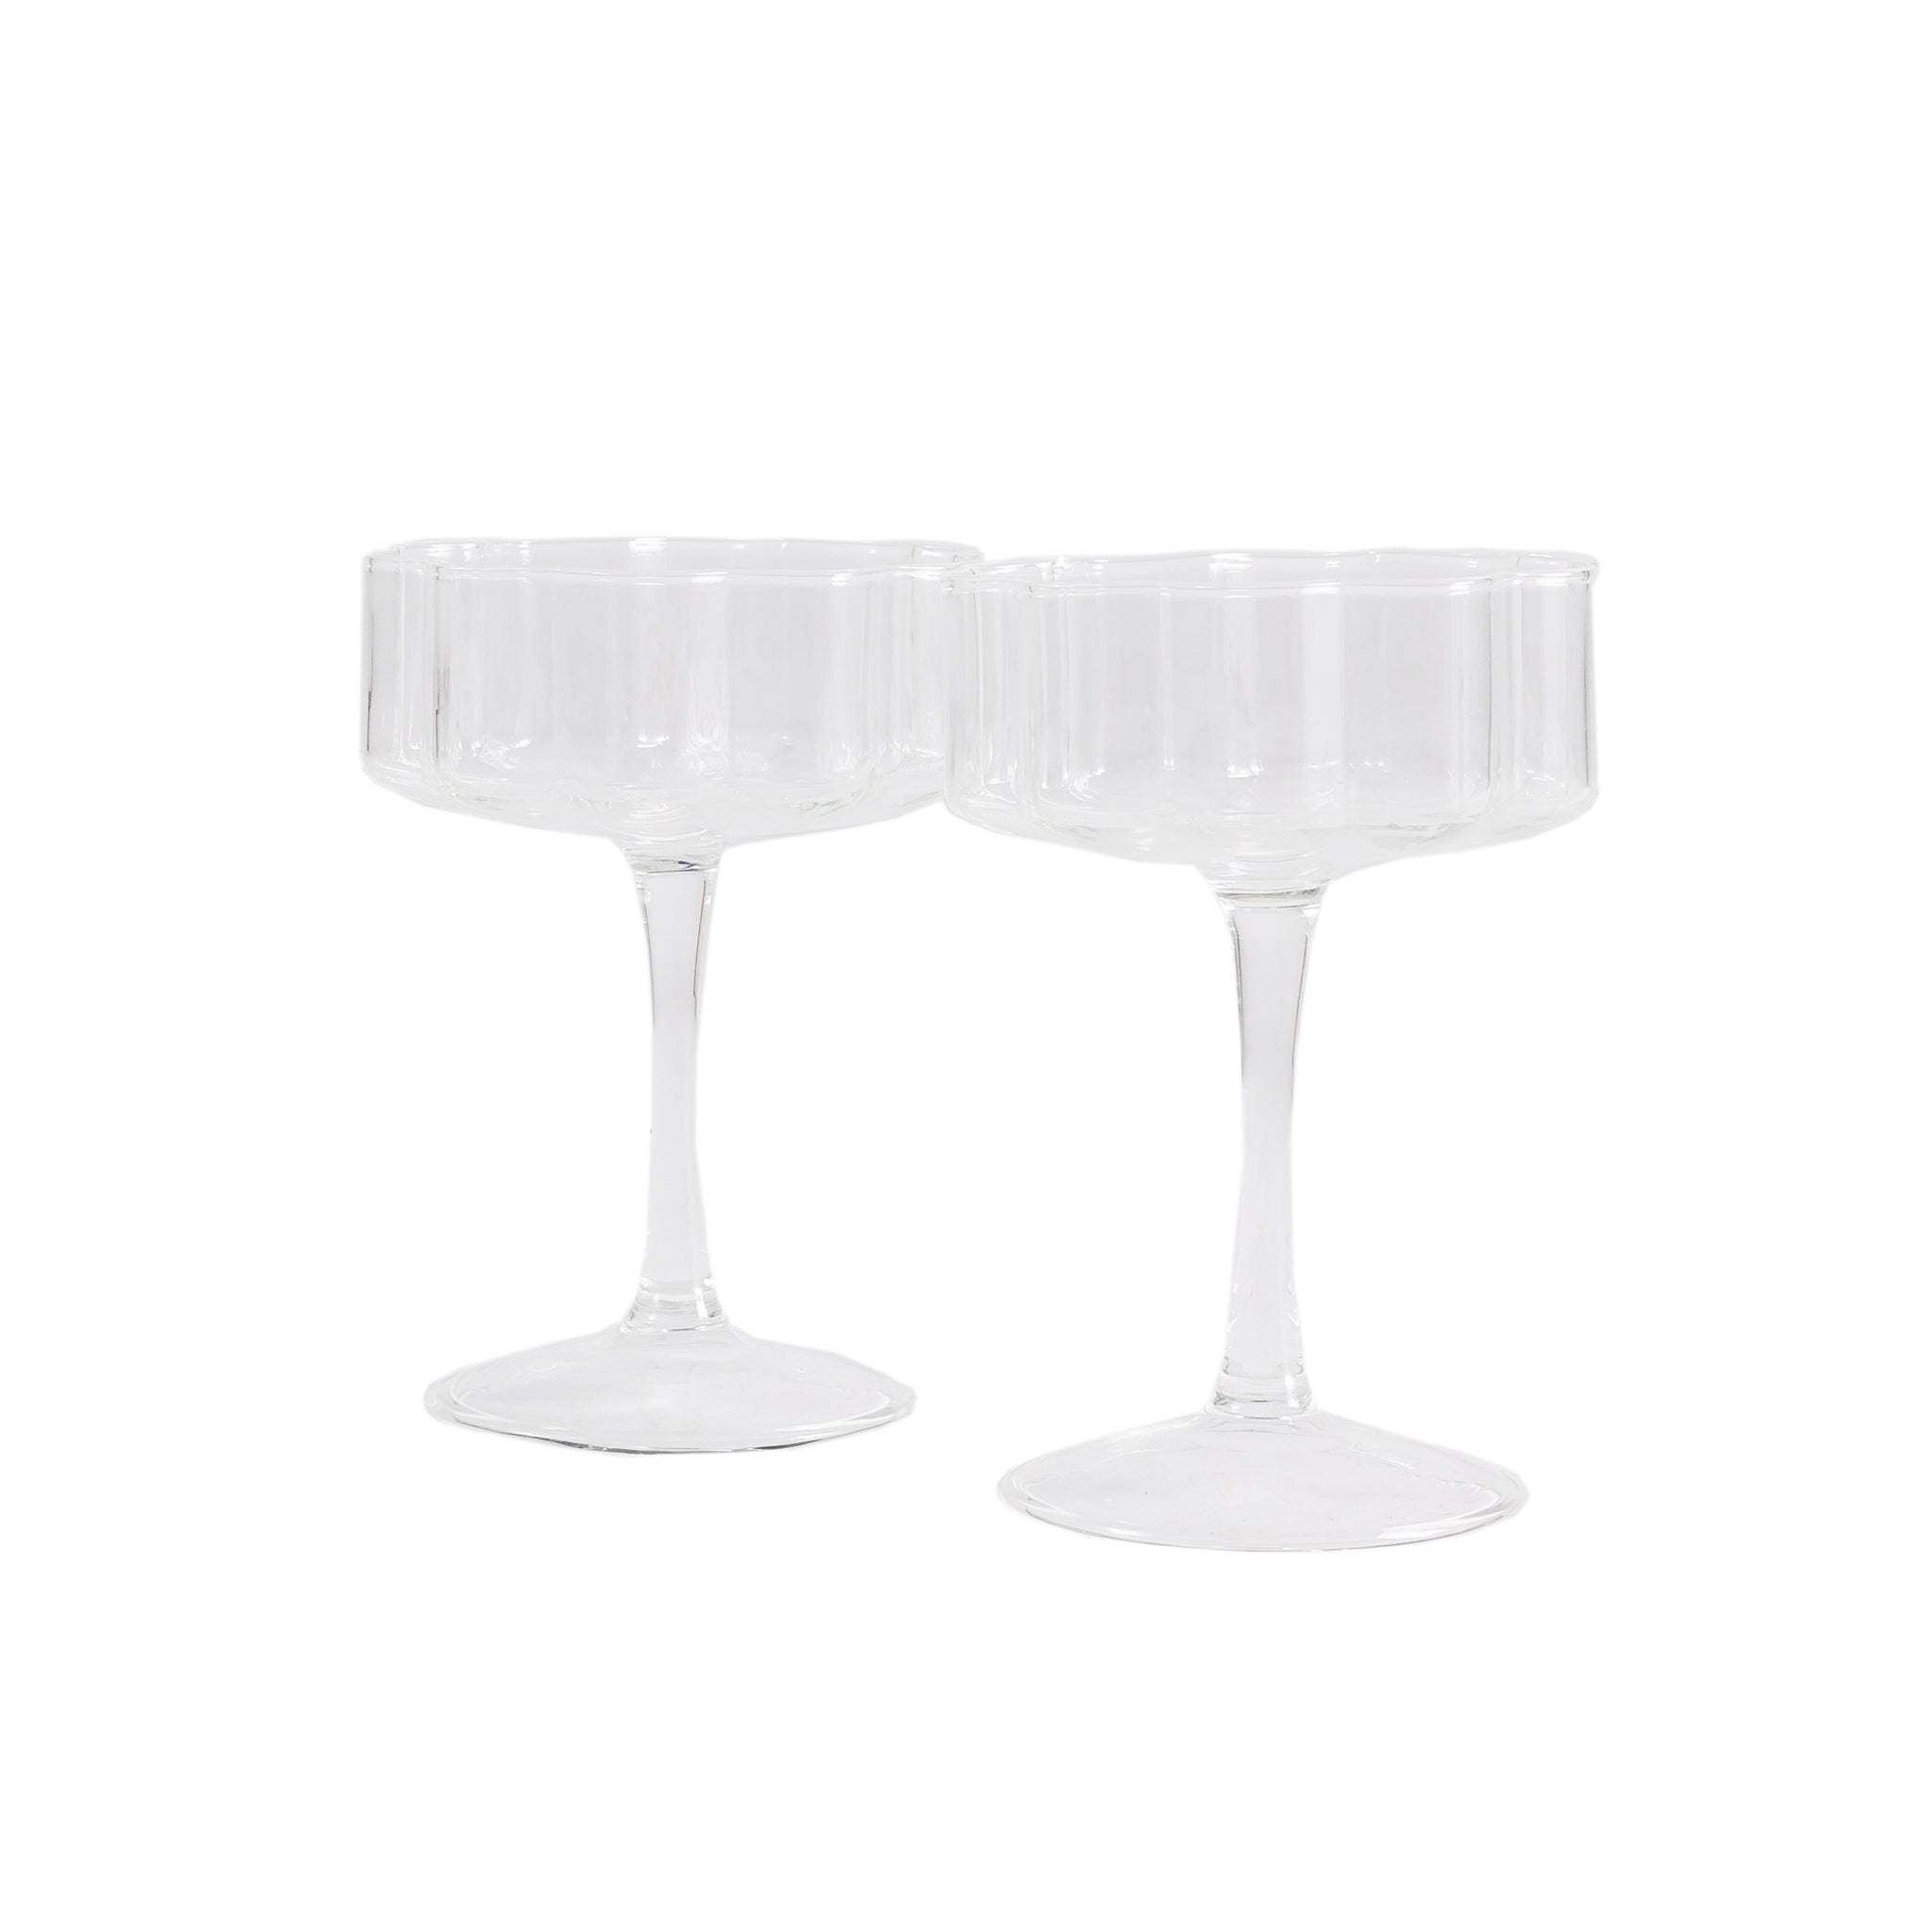 Vinglacé Wine Sets with Glass Lined Wine Glasses - Premier Cellars